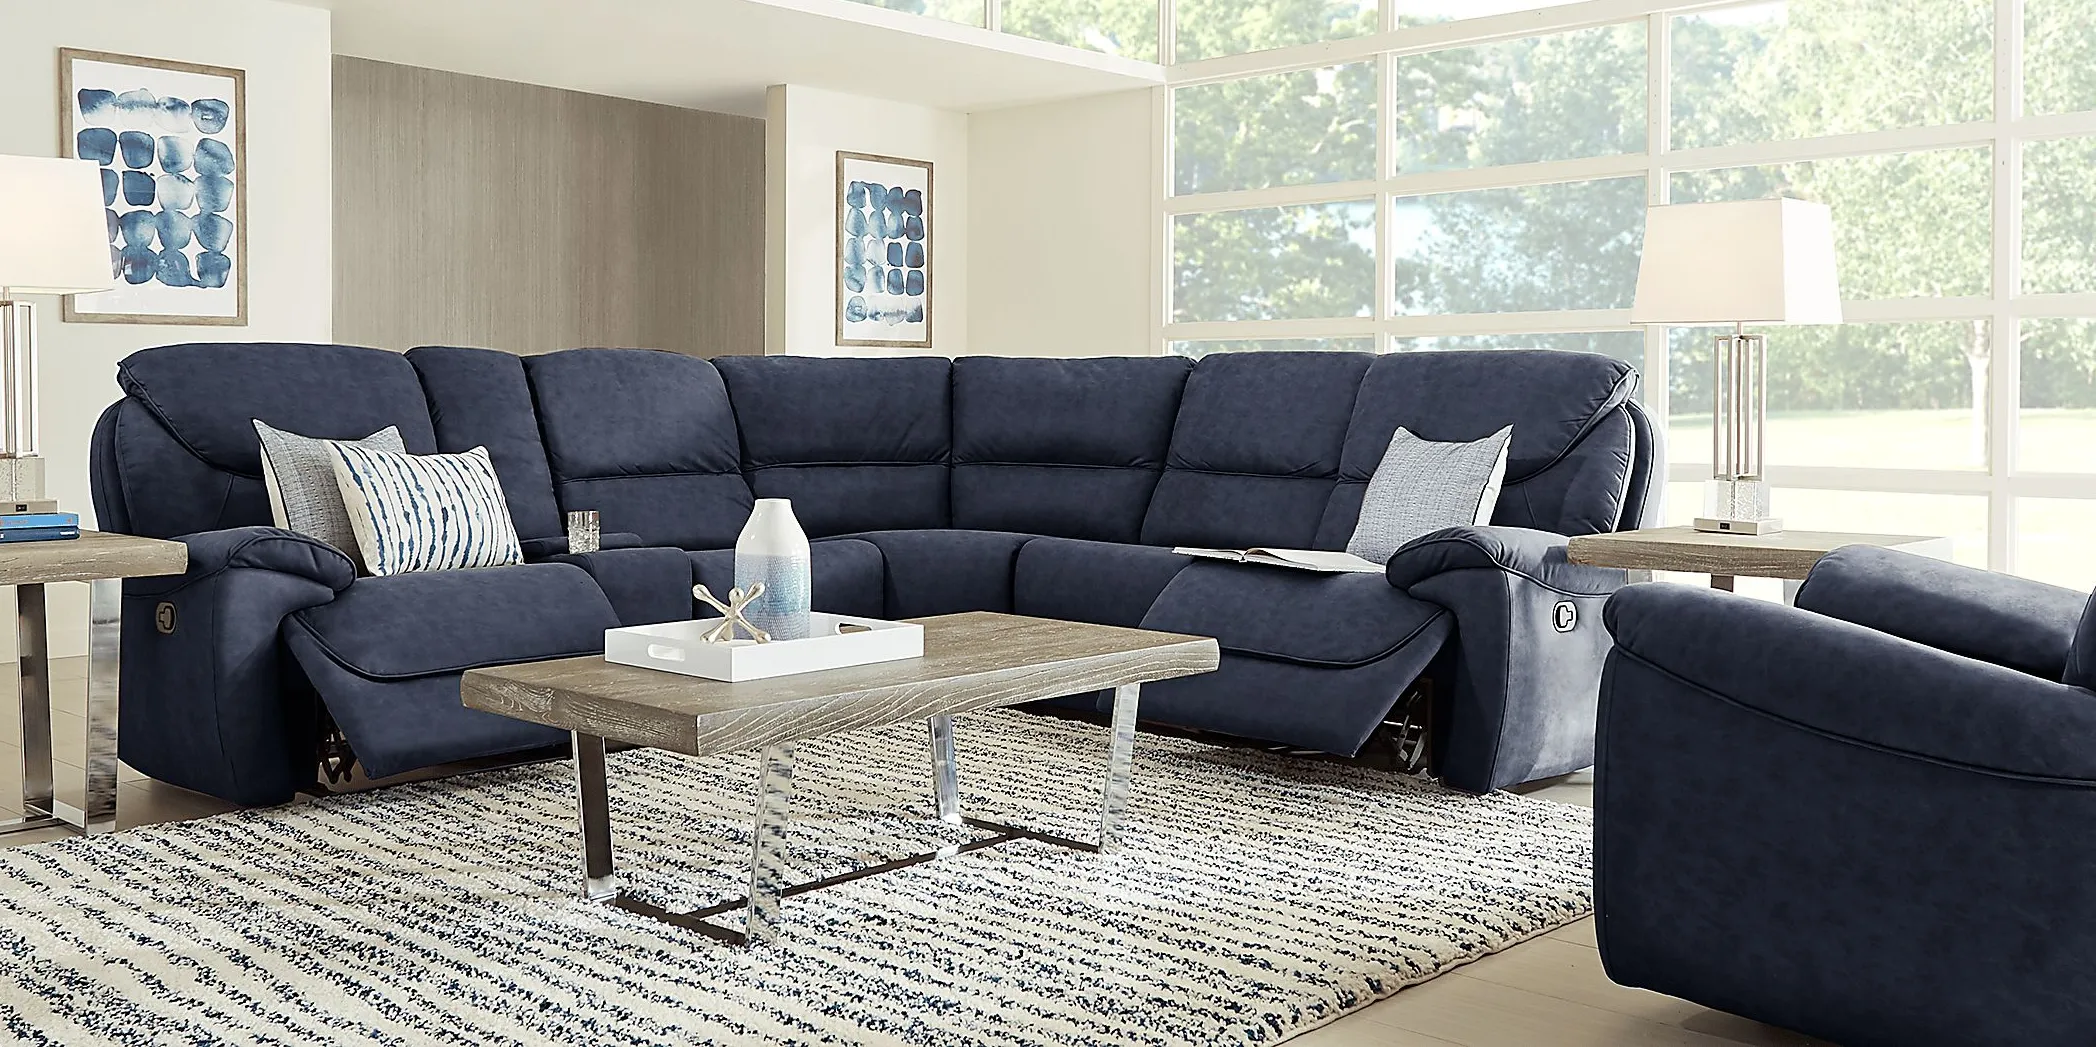 South Brook Blue 9 Pc Reclining Sectional Living Room